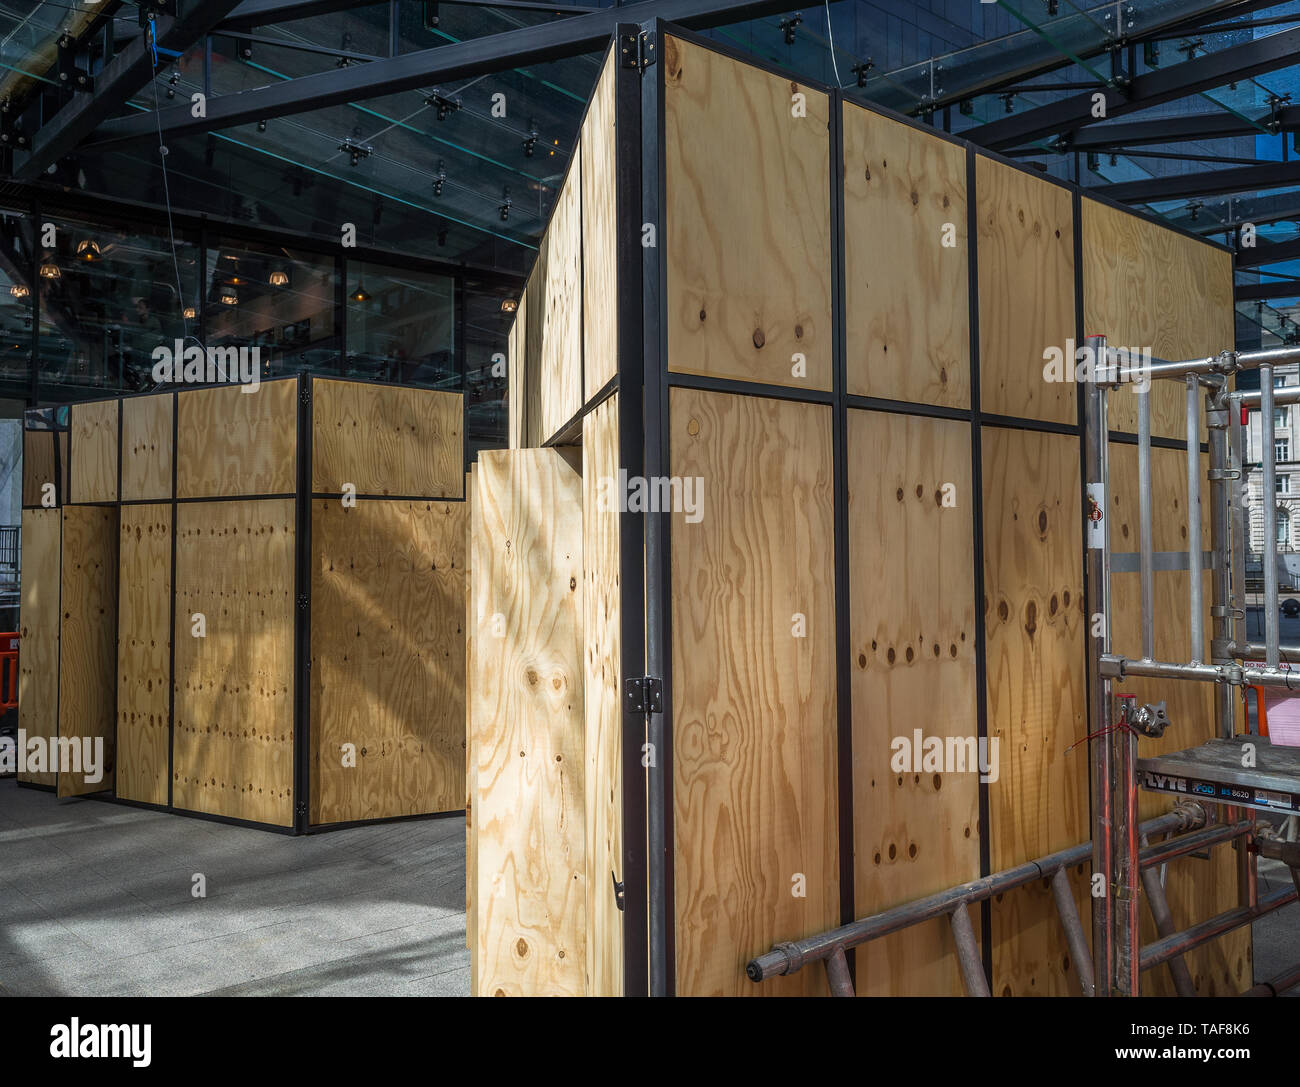 Holz- ausstellung Container. Stockfoto